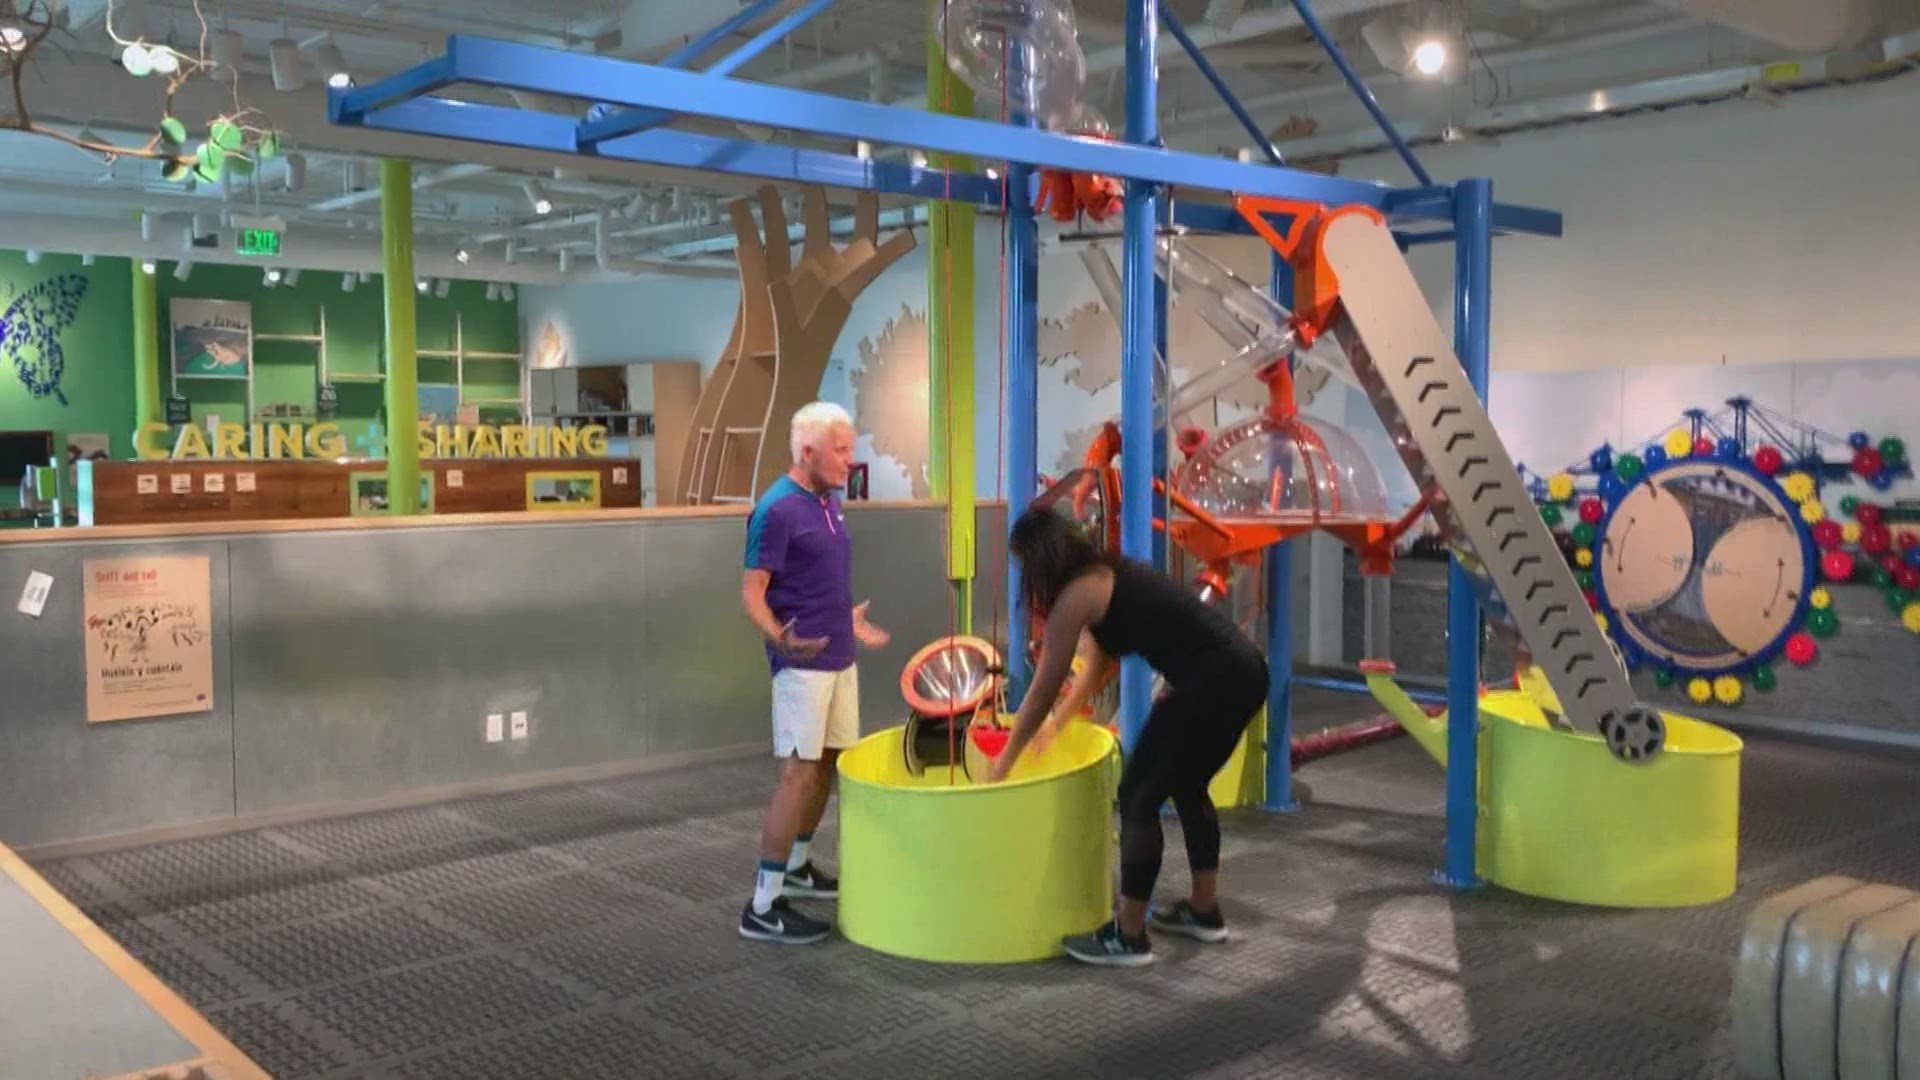 Mackie and April show us shoulder excercises while giving a glimpse inside the LA Children's Museum